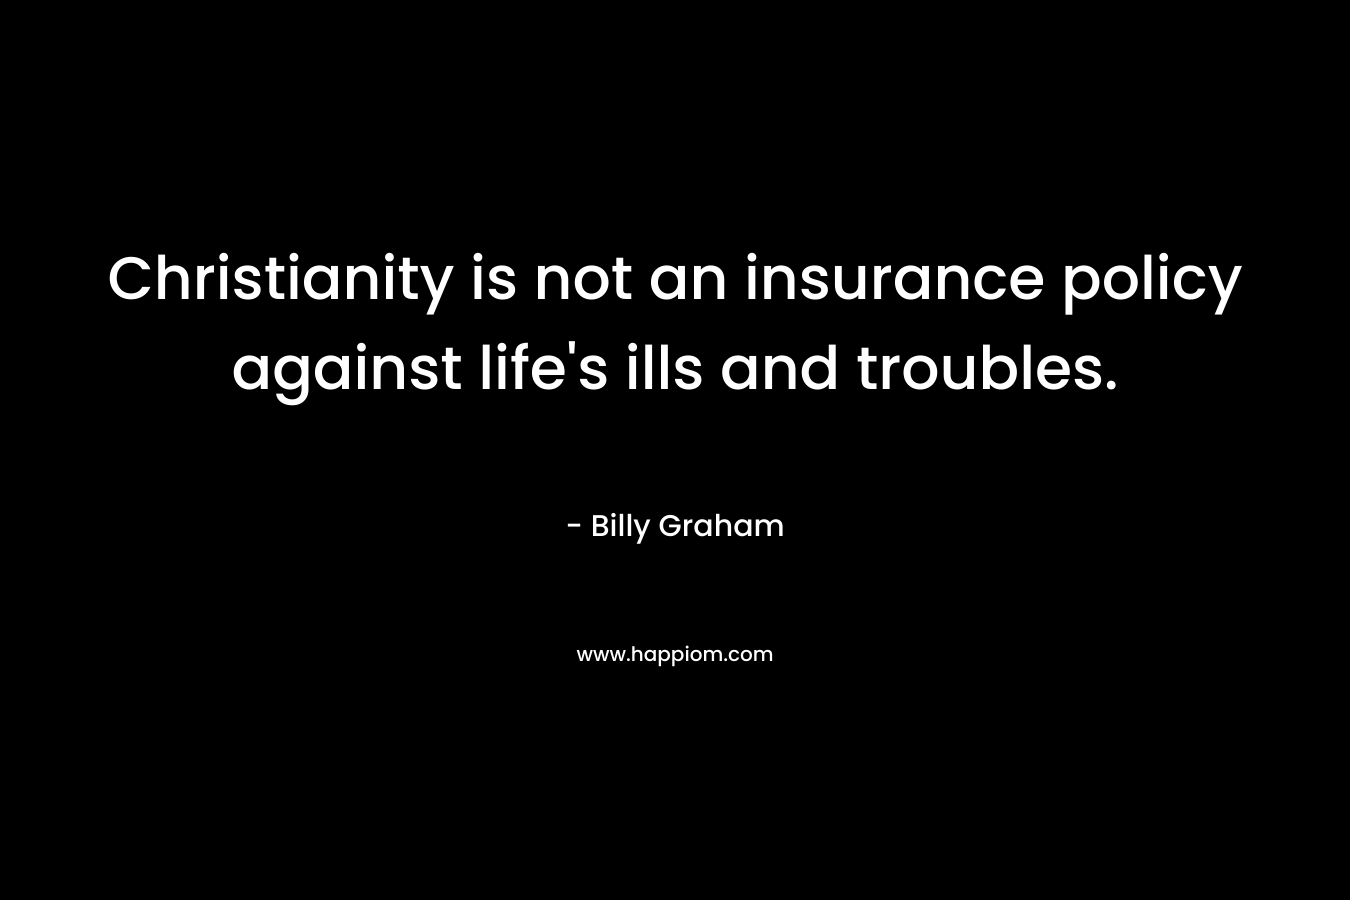 Christianity is not an insurance policy against life's ills and troubles.